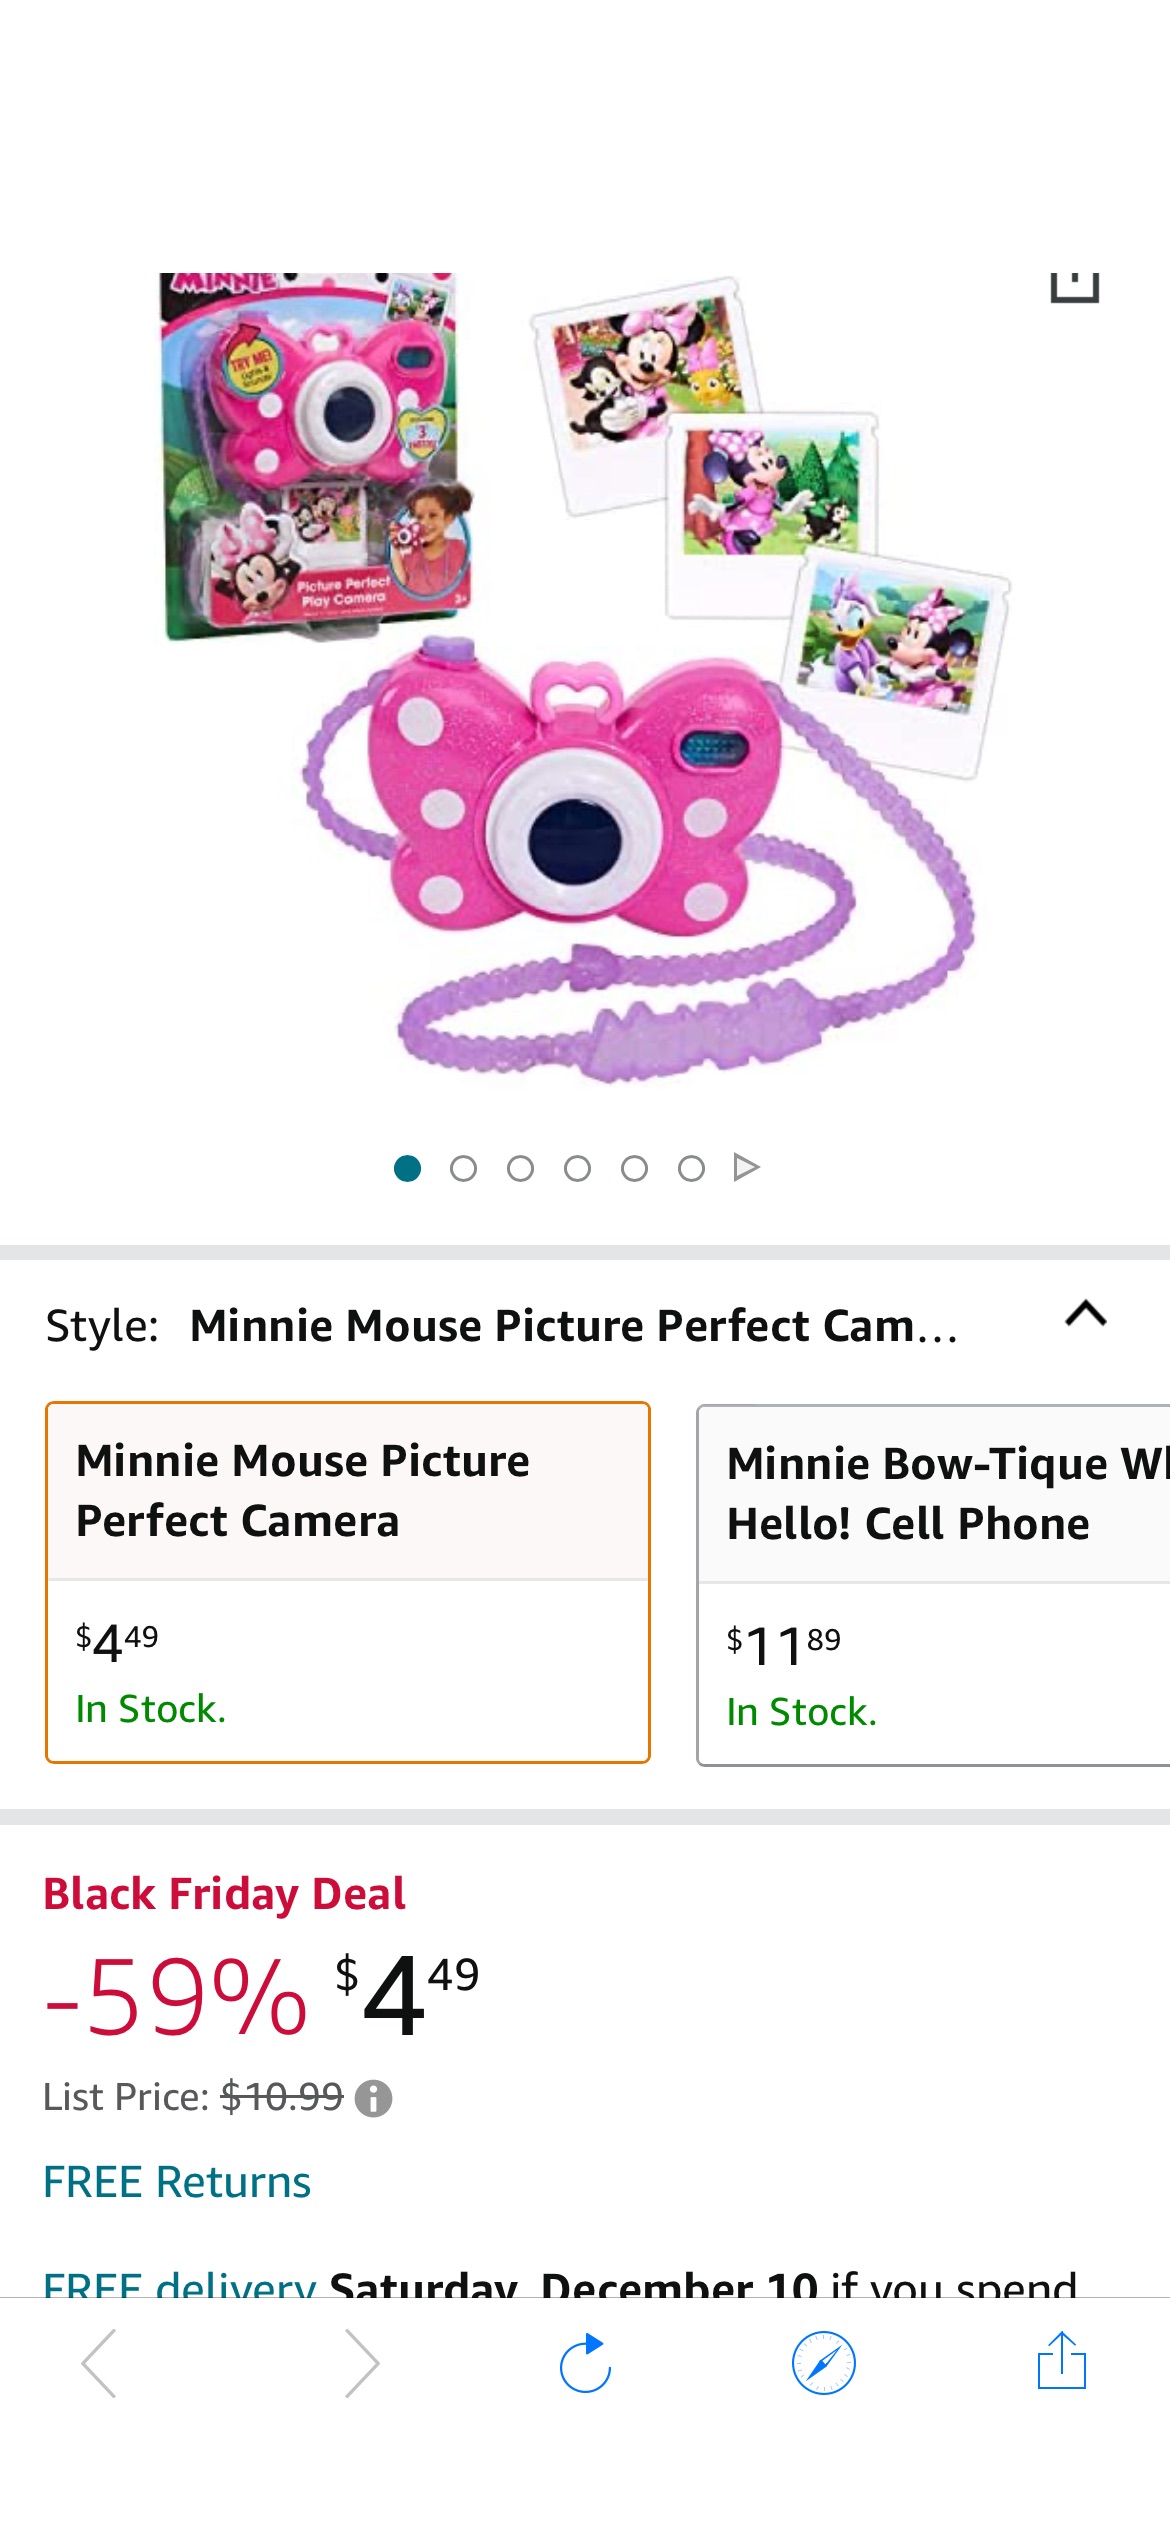 Amazon.com: Disney Junior Minnie Mouse 米妮Picture Perfect Camera, Lights and Realistic Sounds Pretend Play Toy Camera for 3 Year Old Girls, by Just Play : Toys & Games